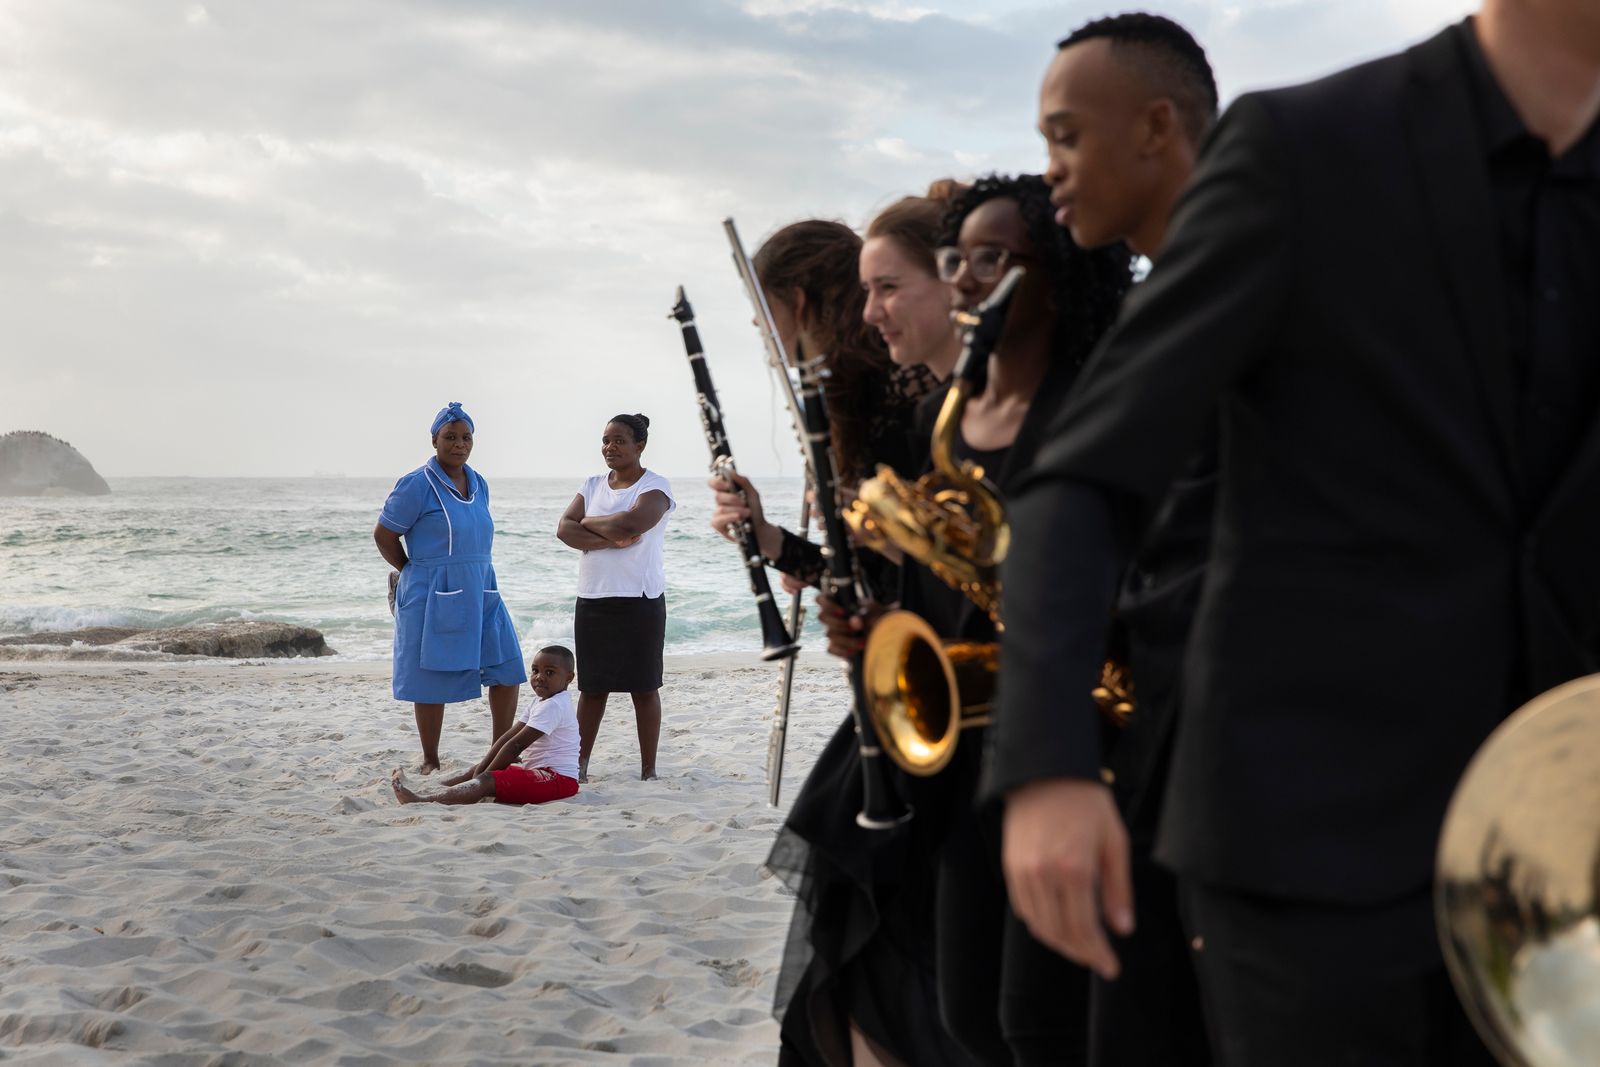 © Ilvy Njiokiktjien - The South African National Youth Orchestra walk away after they have performed on the beach in South Africa.